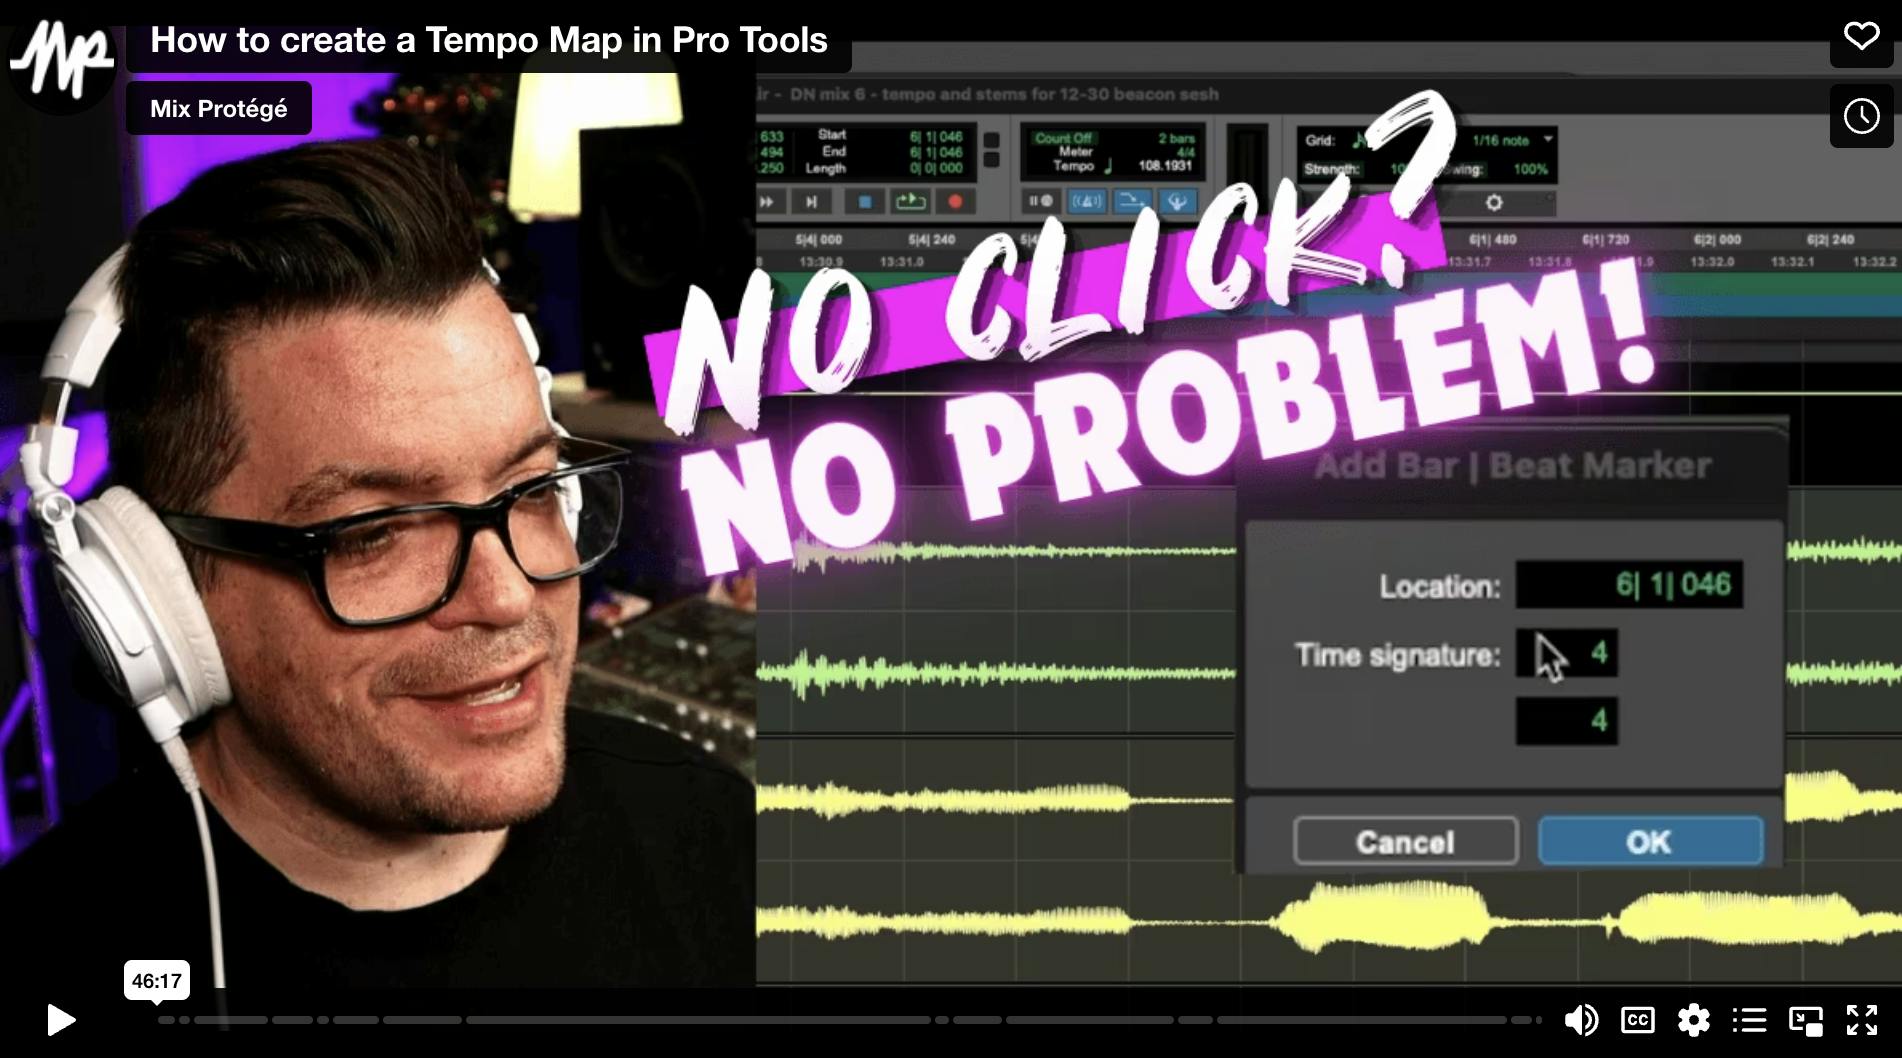 Video thumbnail of Dana looking at Pro Tools software with text overlay: No Click? No Problem!